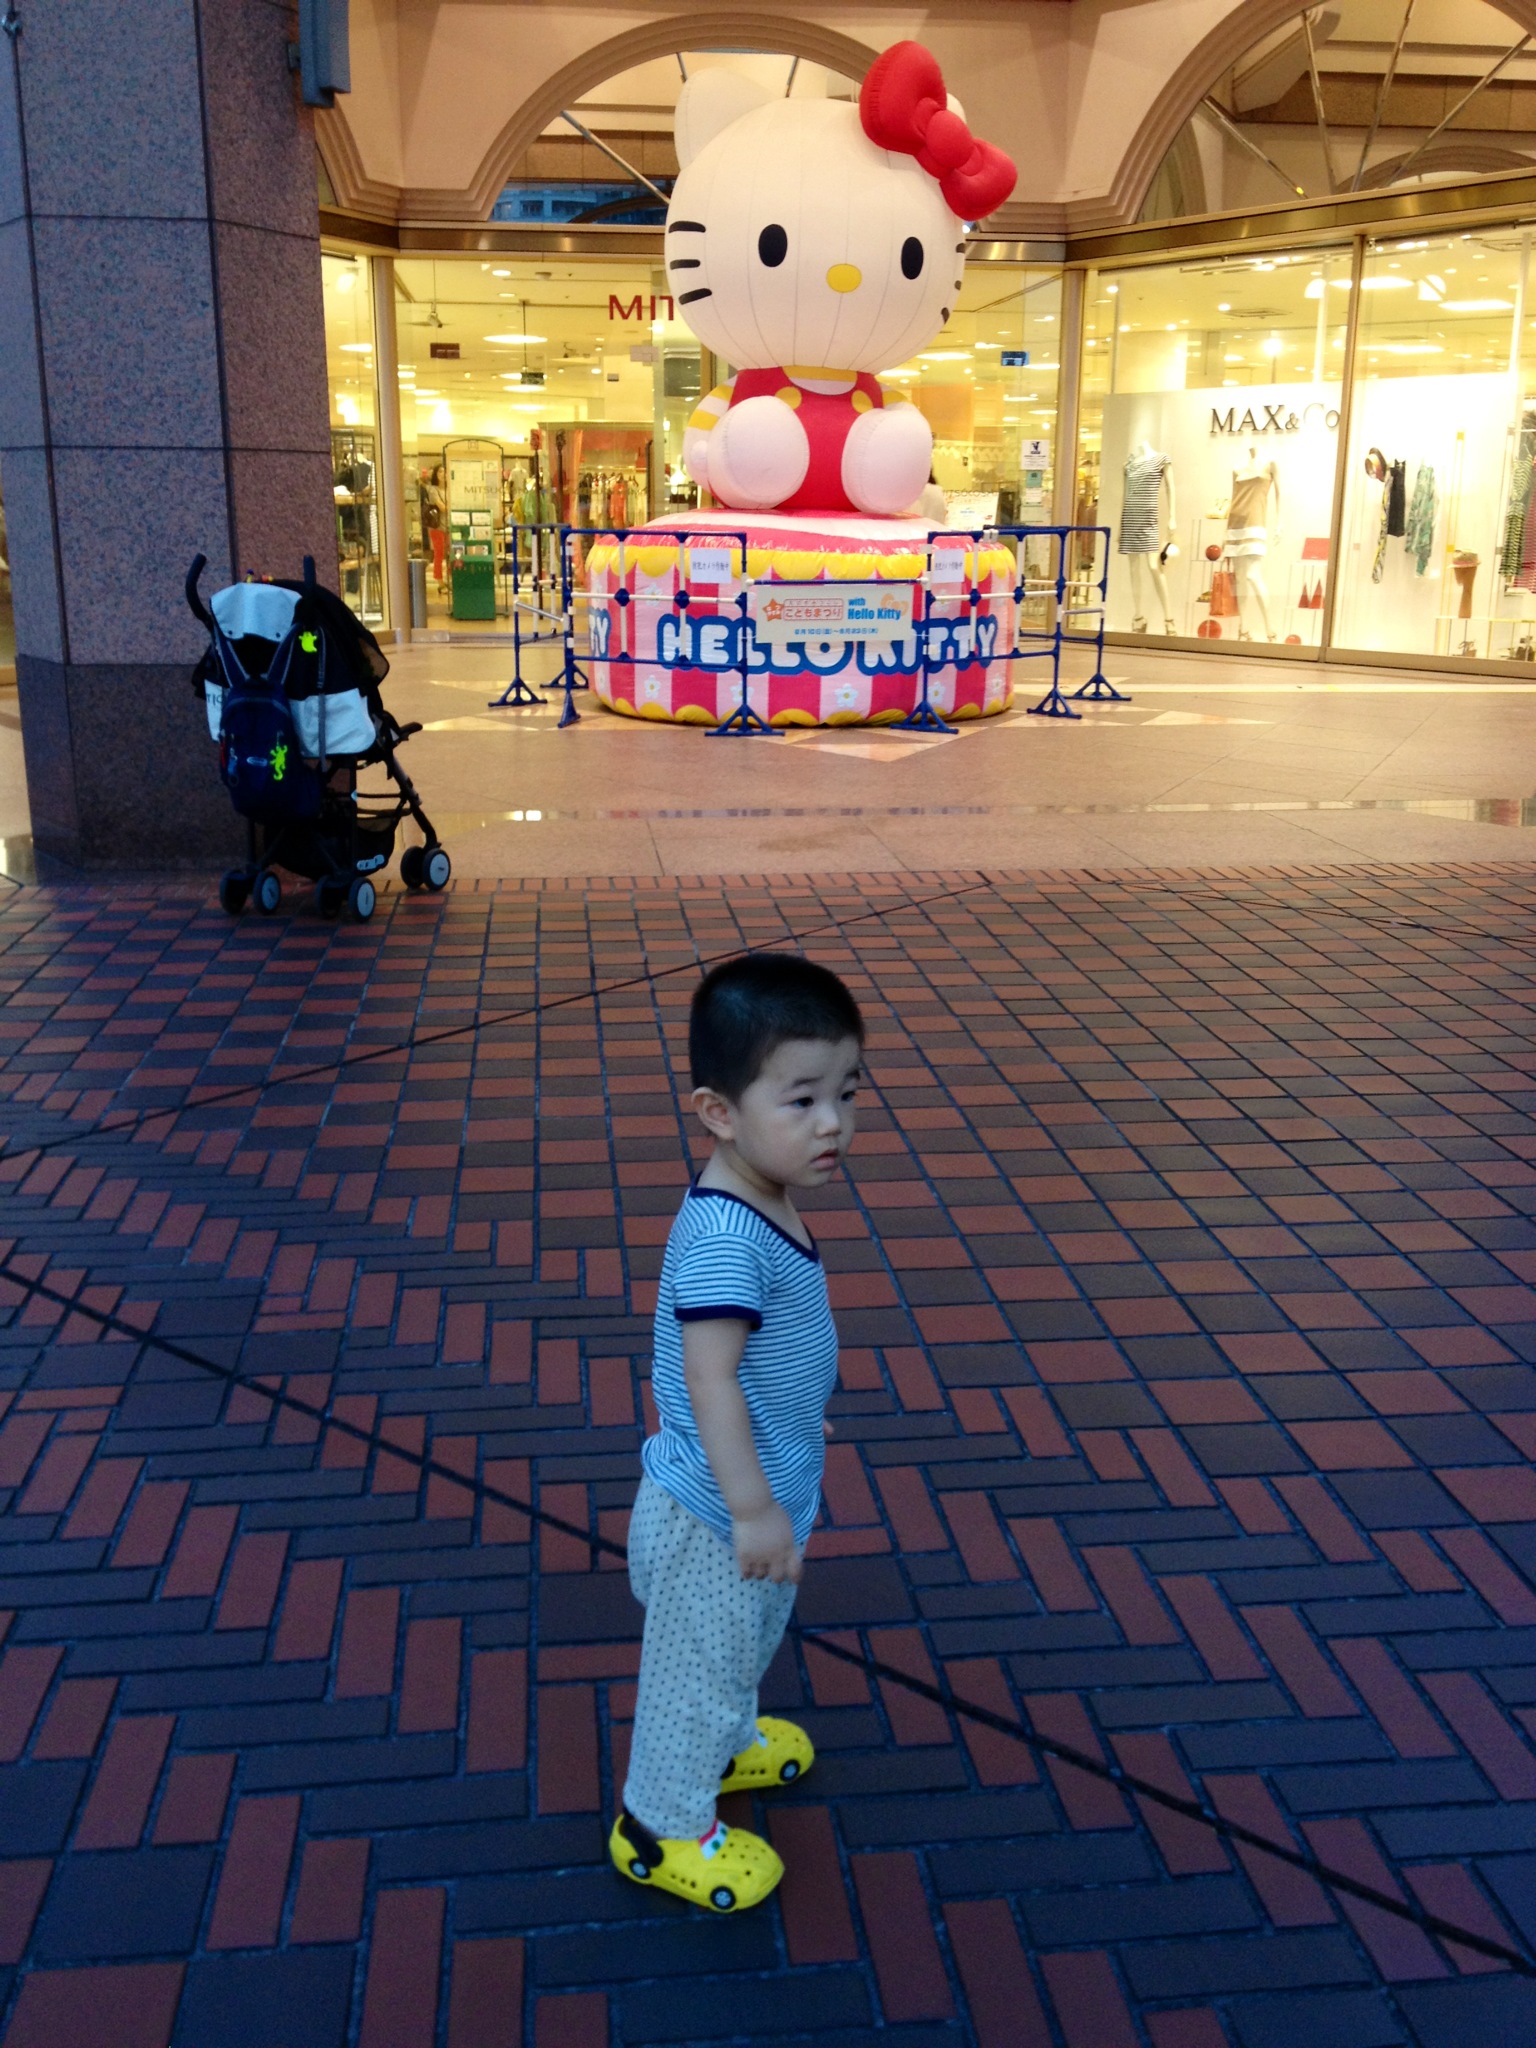 the small boy is standing in front of the hello kitty store